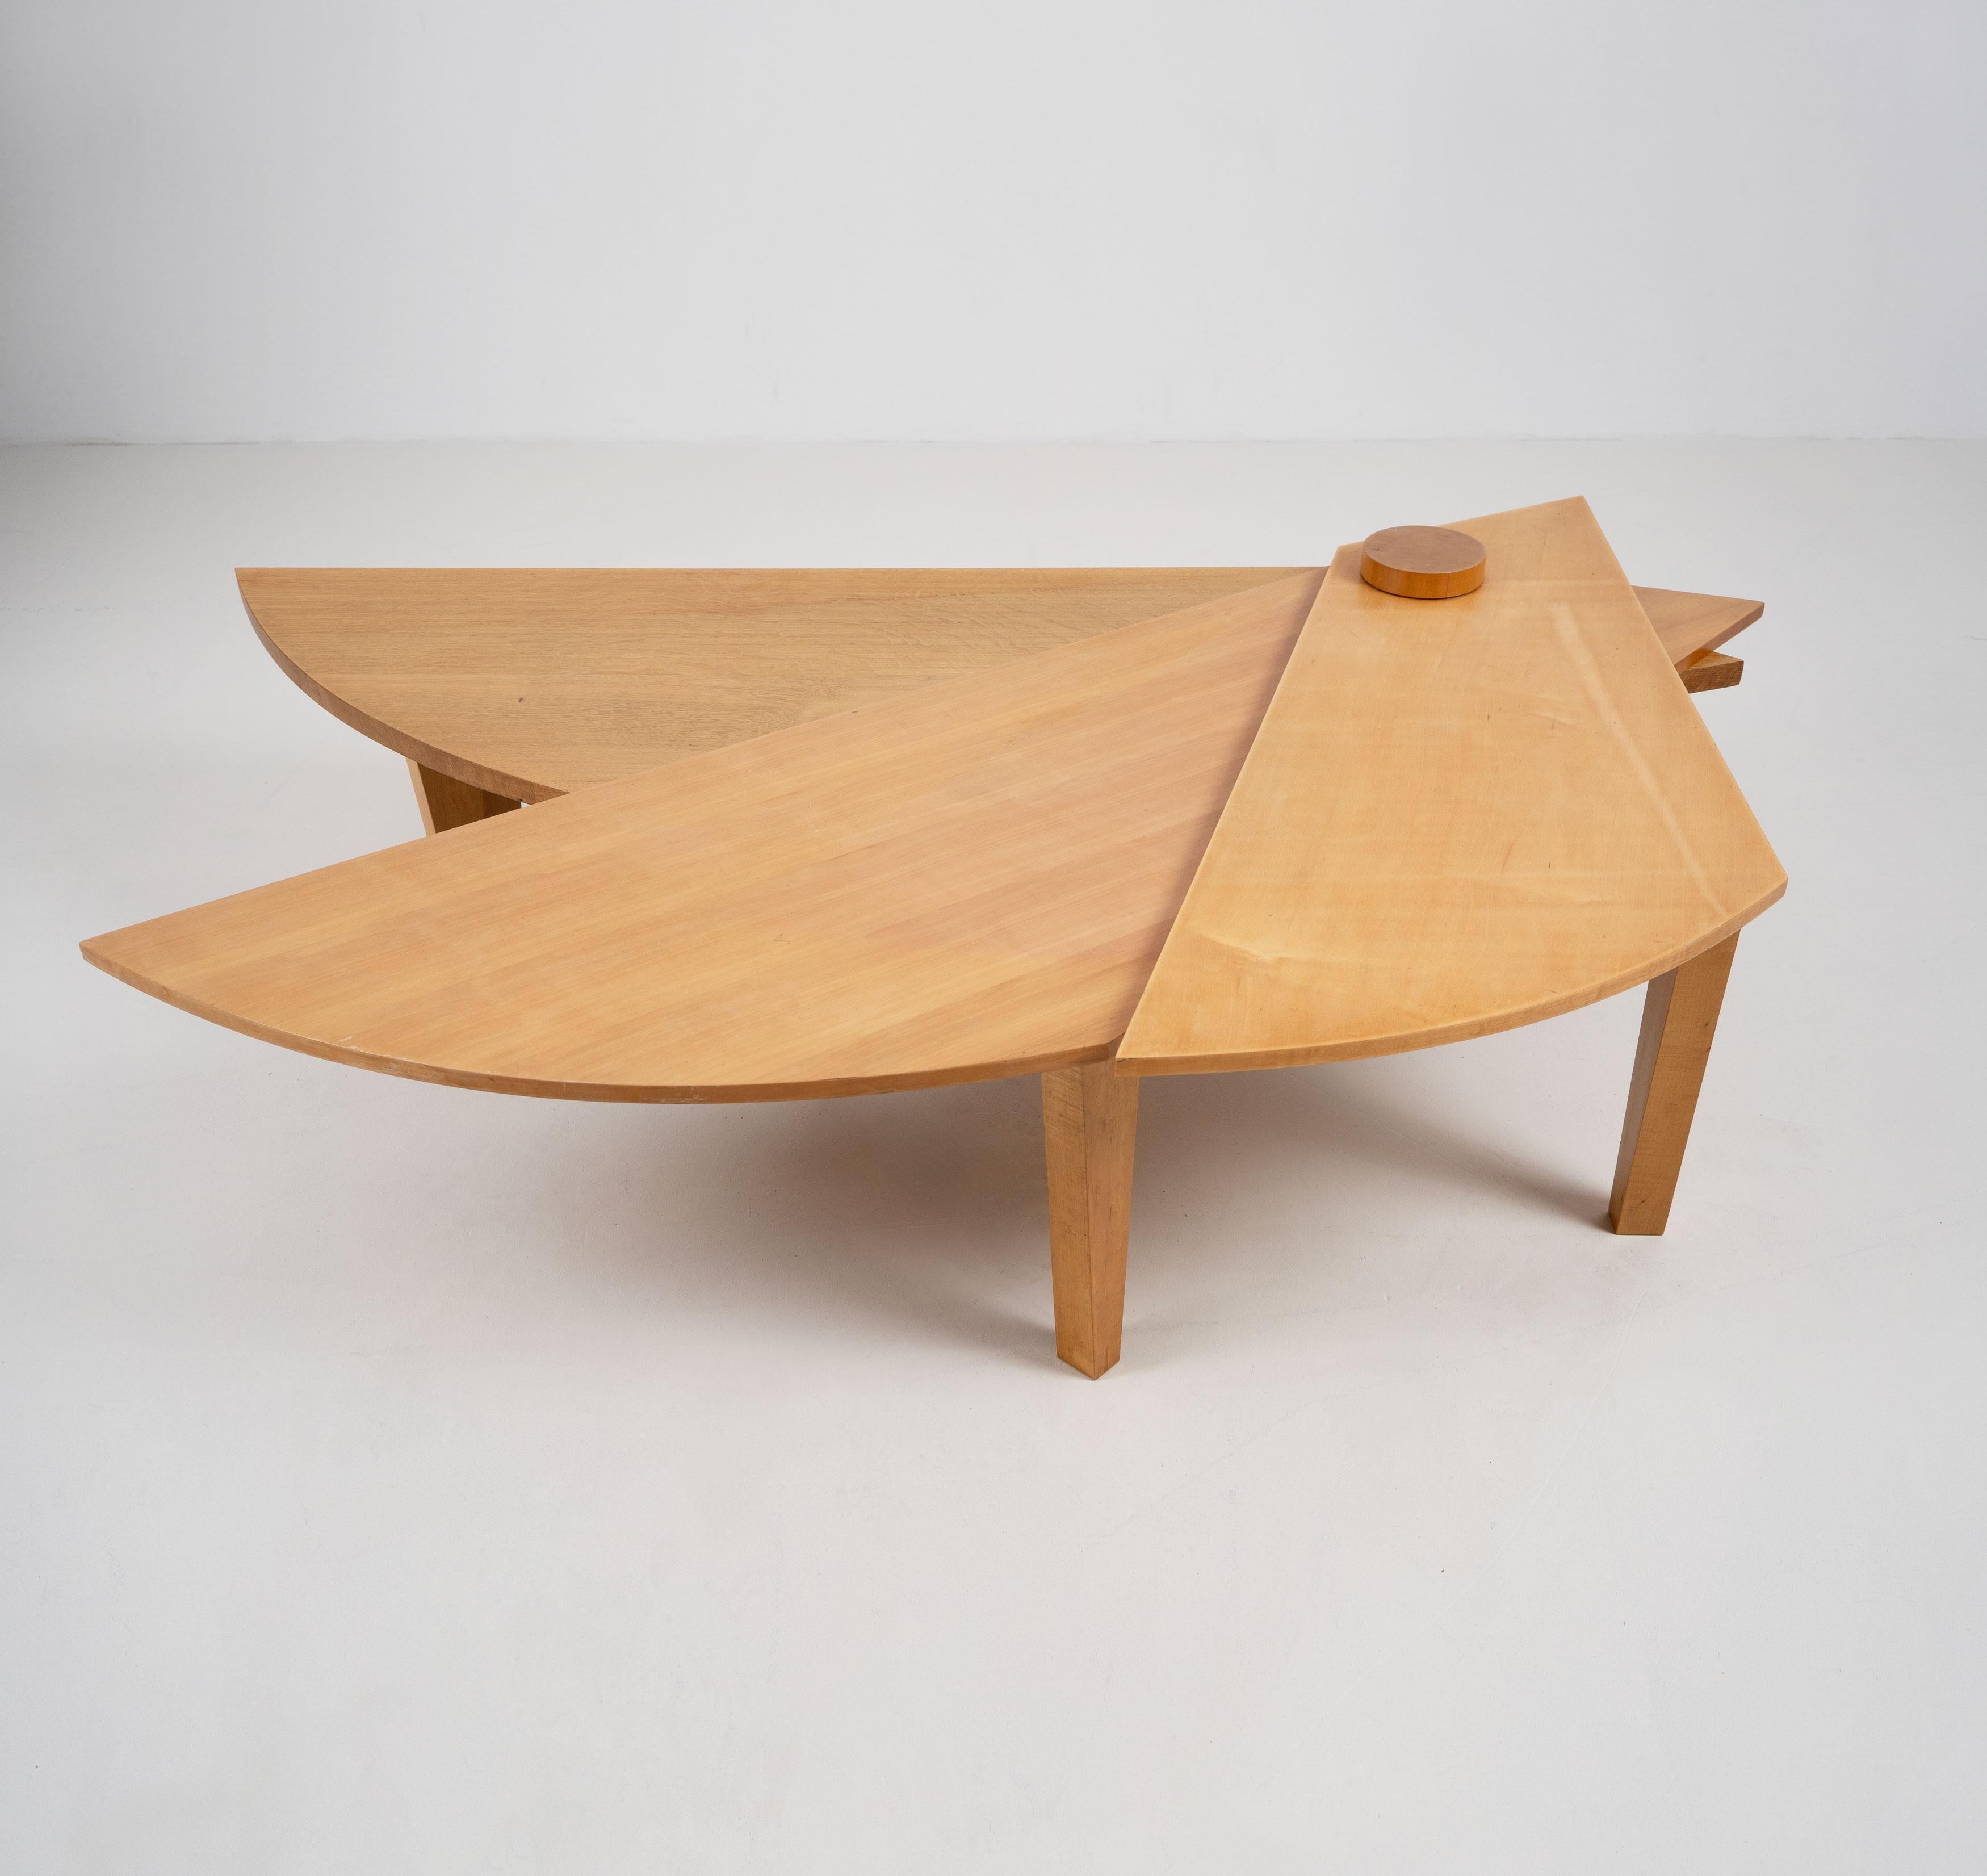 Late 20th Century Metamorphic Coffee Table after John Makepeace, c.1990